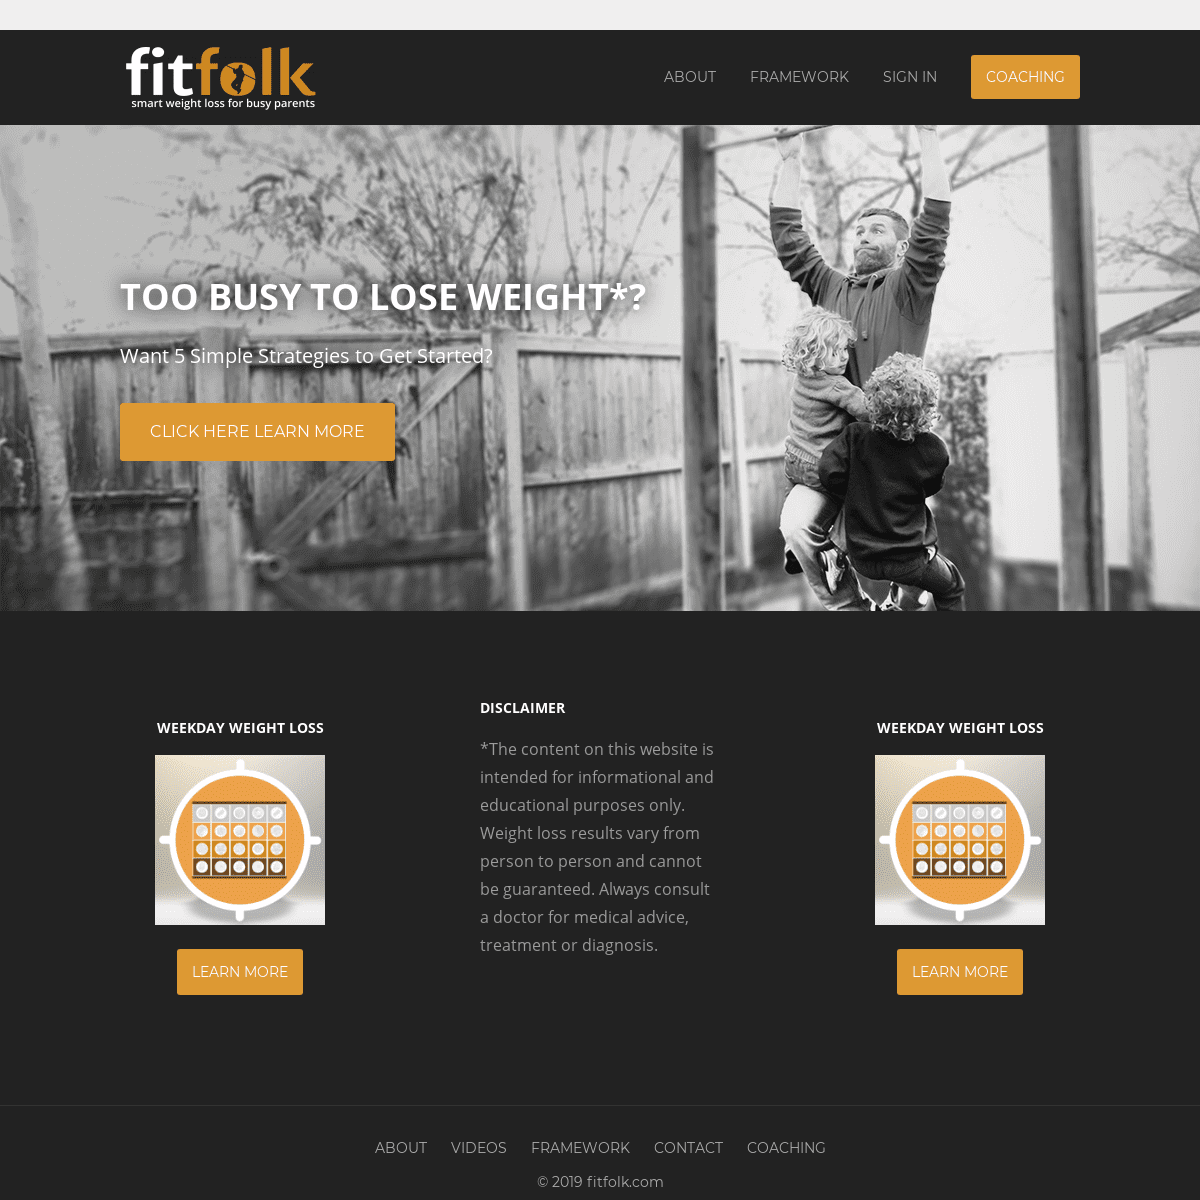 FitFolk - Smart weight loss for busy parents